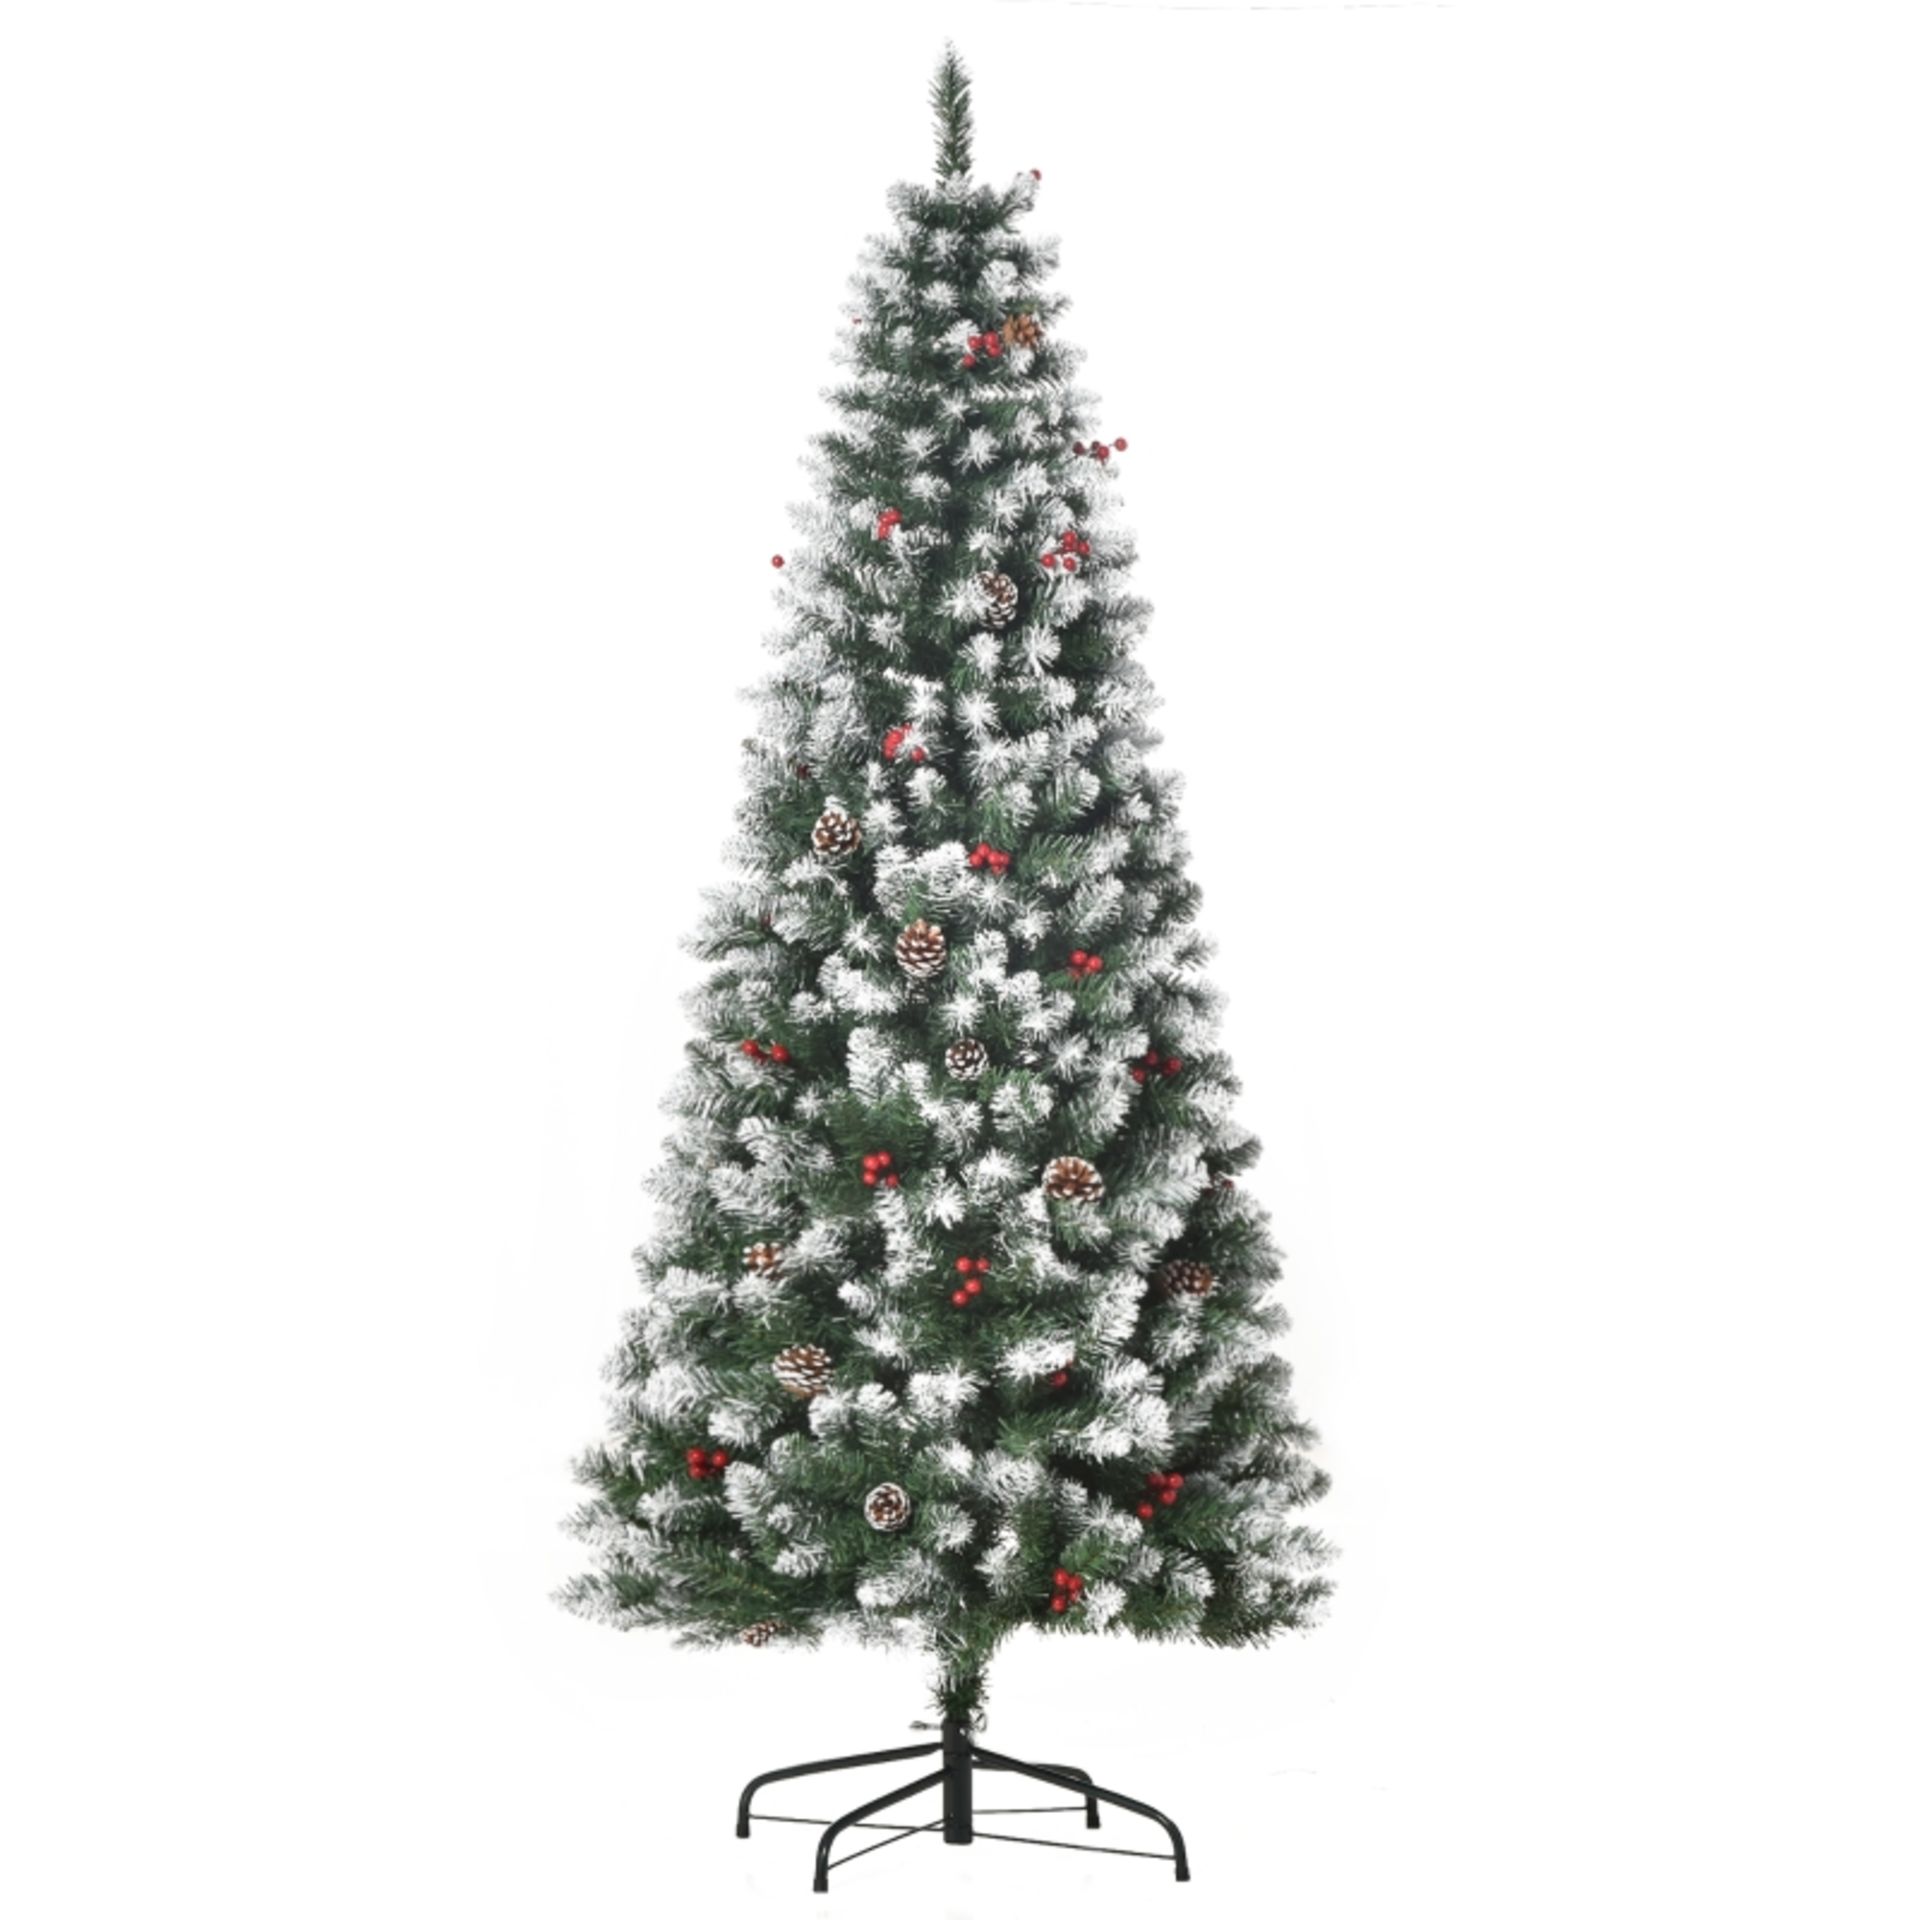 RRP £69.99 - HOMCOM 6FT Artificial Christmas Tree Foldable Feet Xmas Pencil Tree with Red Berries